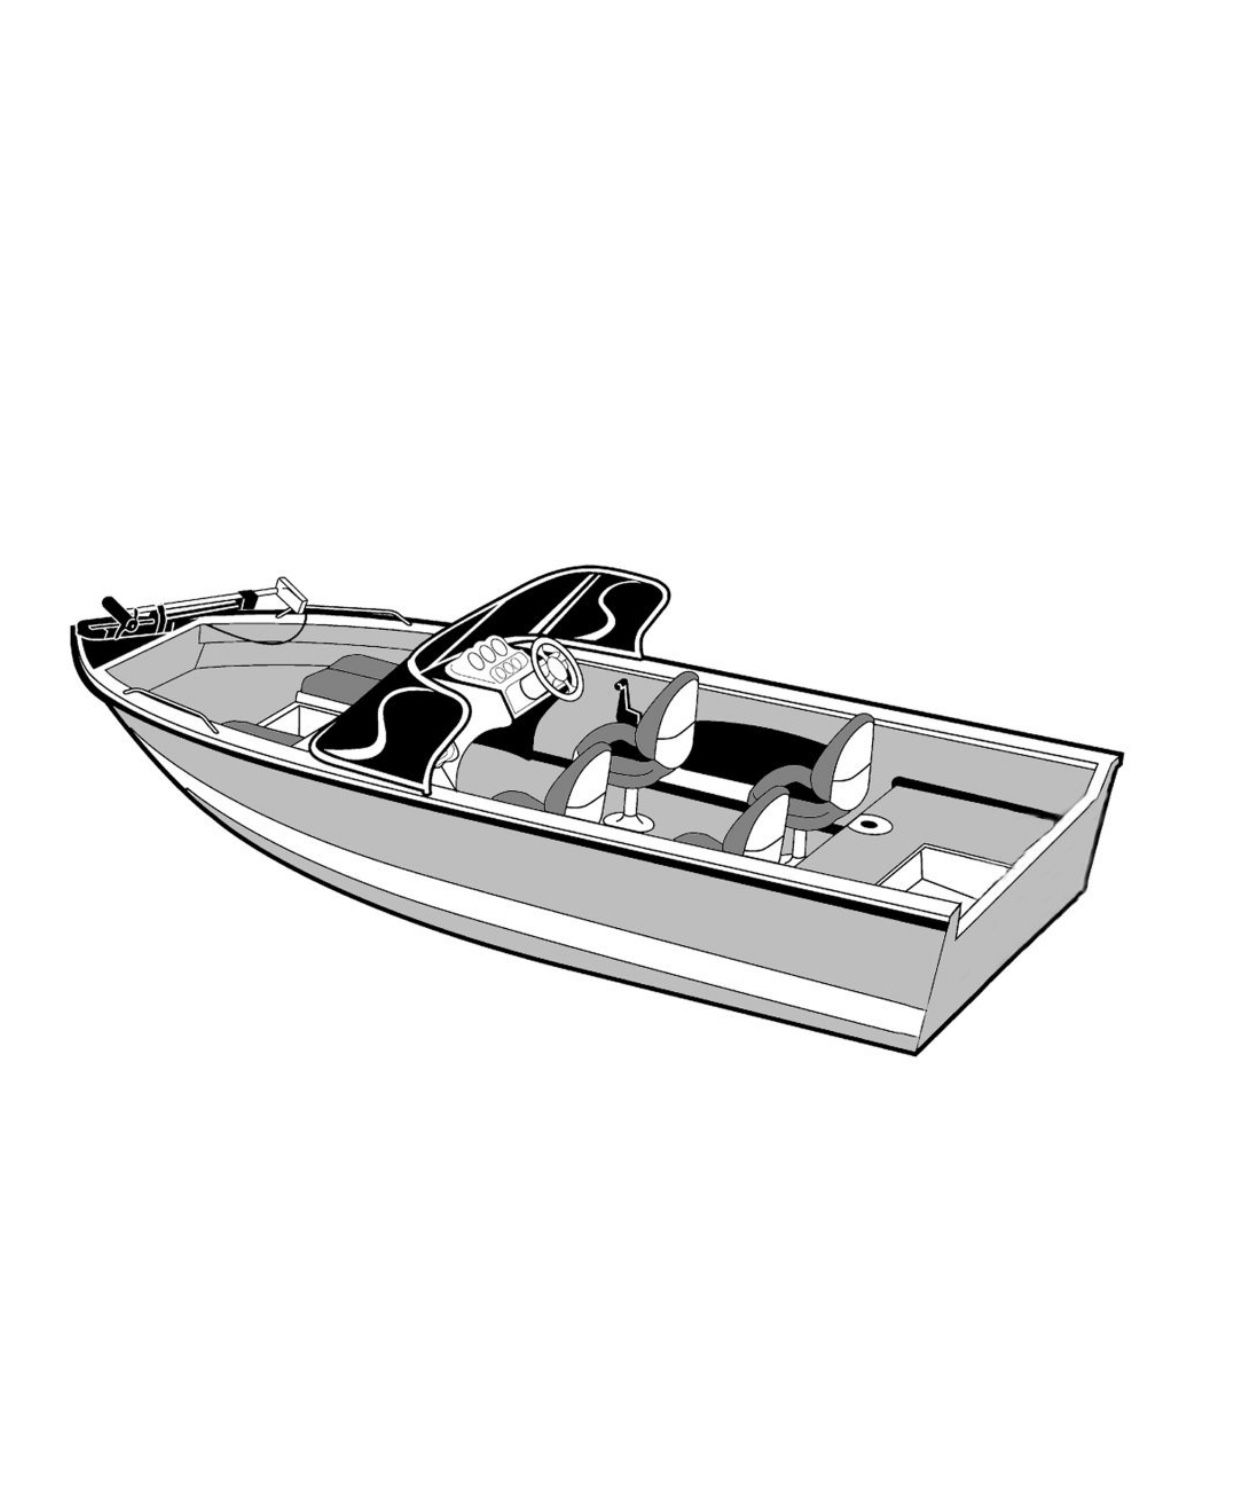 Carver 72316P-10 Styled-to-Fit Cover for Outboard Aluminum V-Hull Boat with Walk-Thru Windshield - 16'6" Length x 100" Width